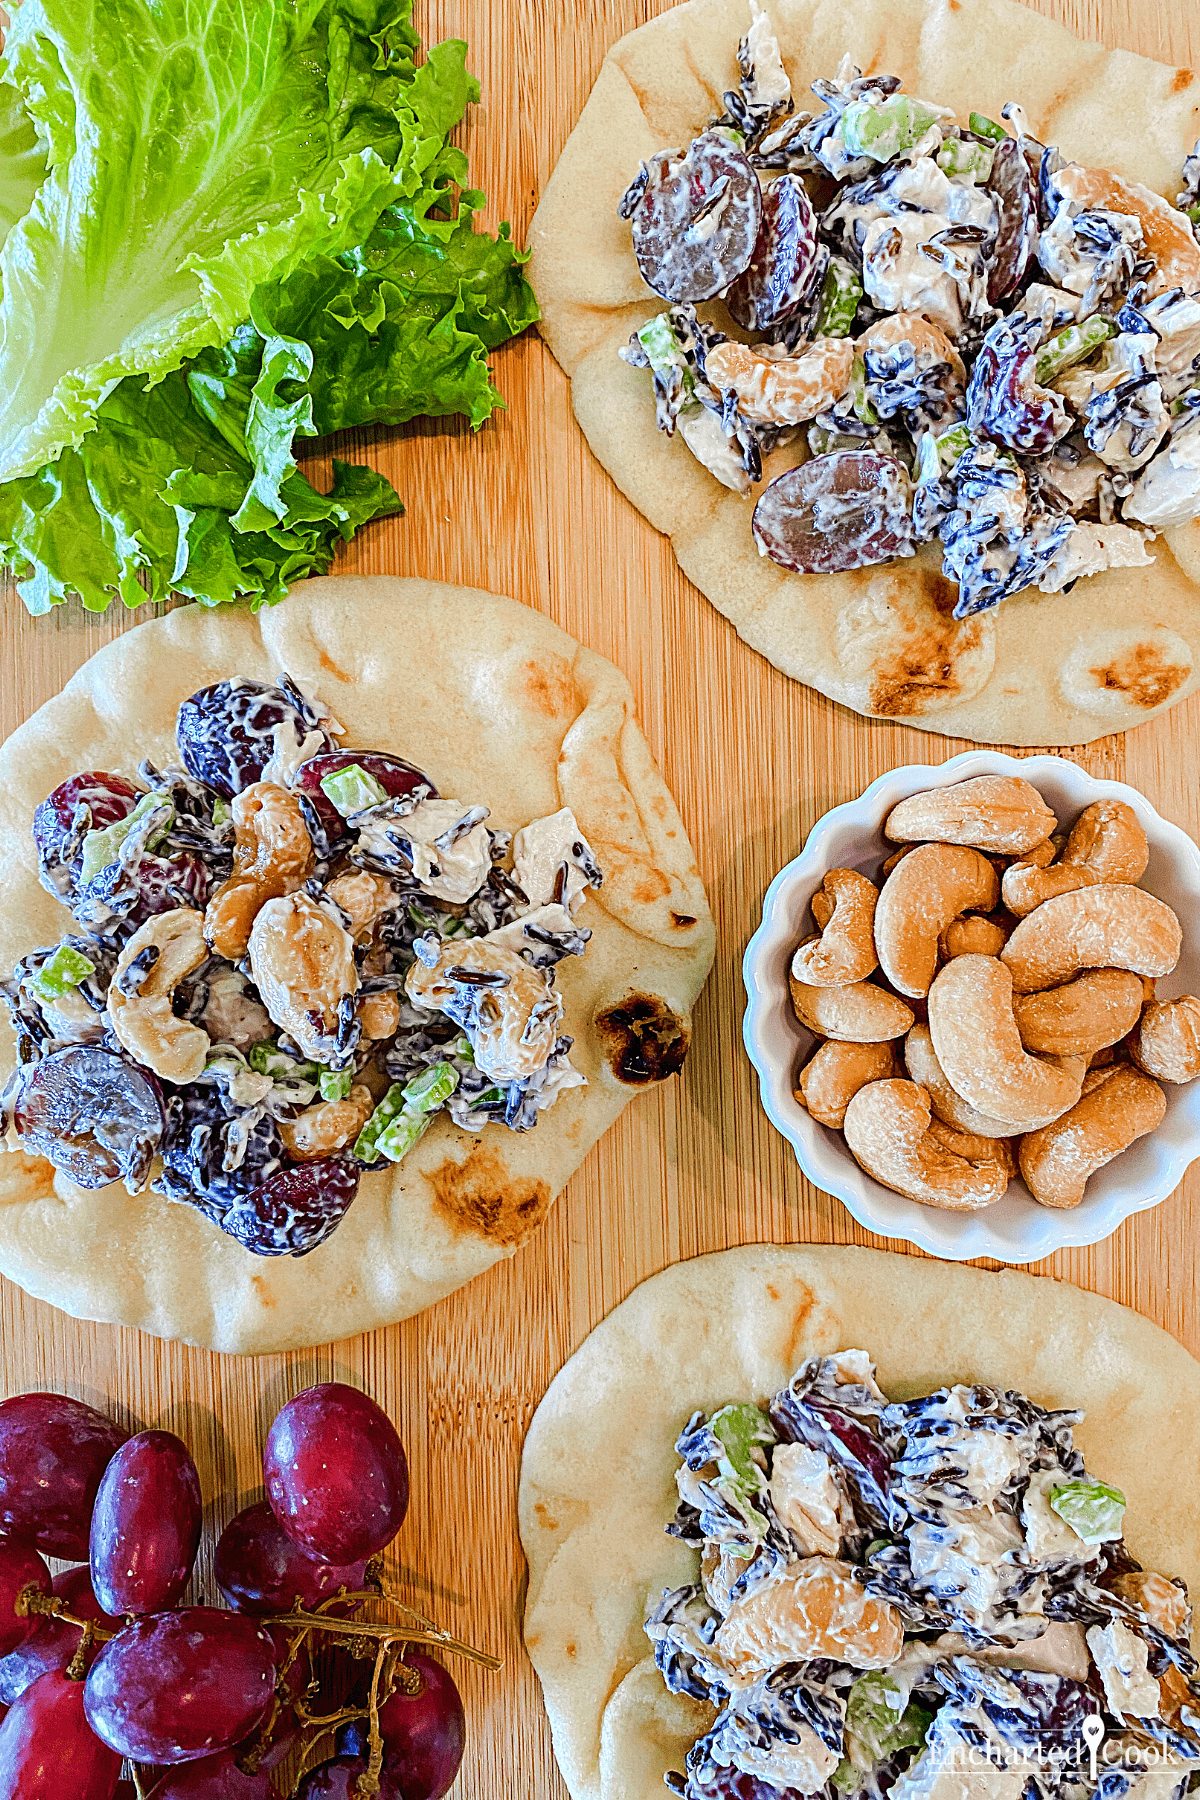 Lettuce, cashews, grapes, and chicken salad on naan bread.